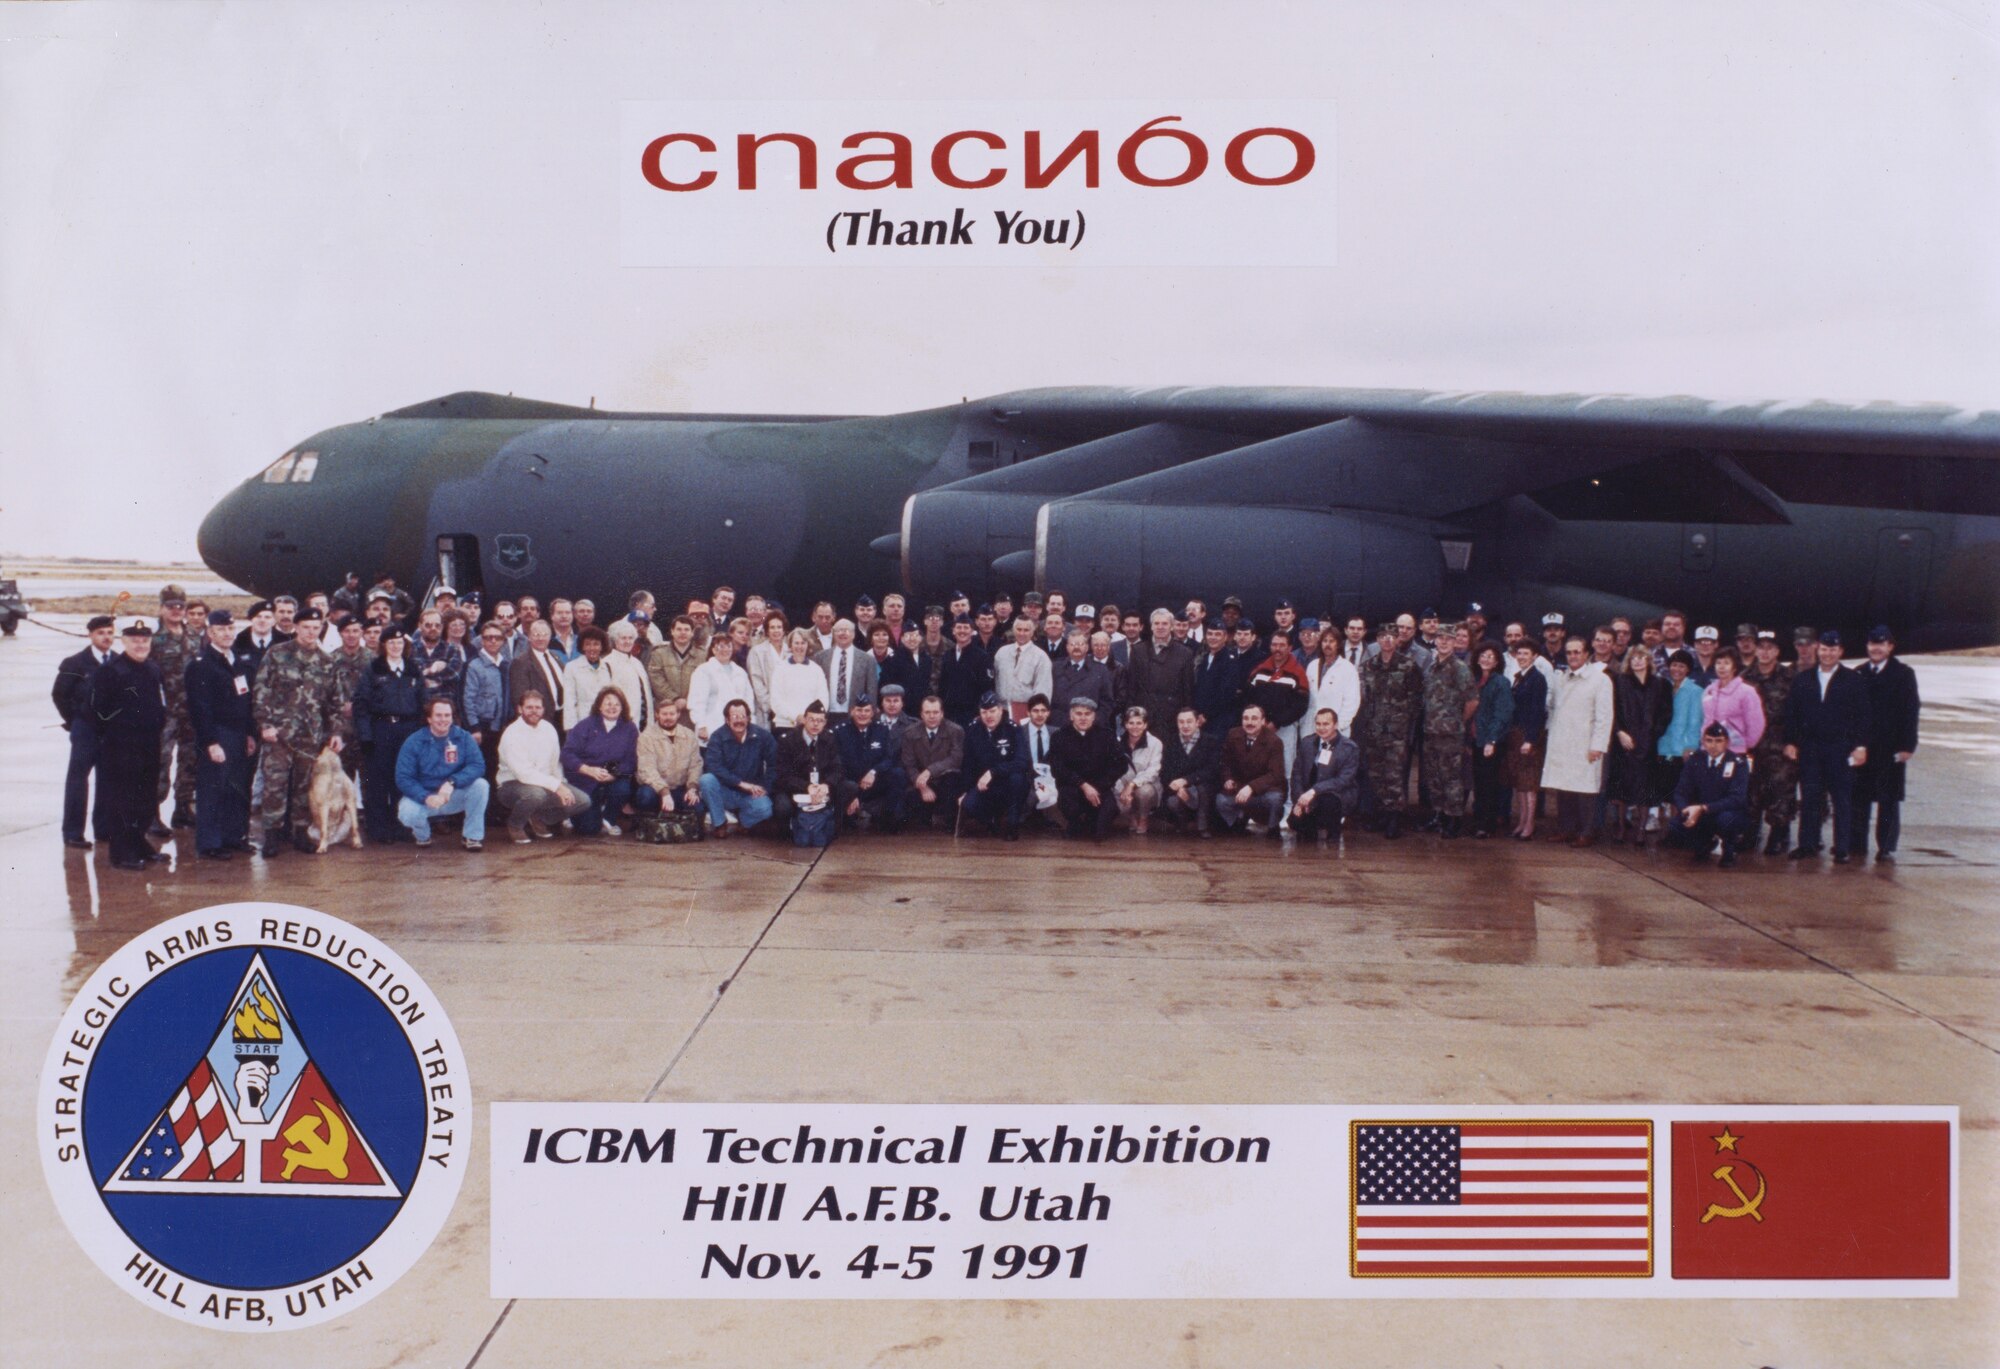 Hill AFB hosted 15 Soviet inspectors for an ICBM Technical Exhibition Nov. 4-5, 1991. This inspection played an important role in moving the implementation of the Strategic Arms Reduction Treaty forward because it showed the two sides could work together – making the treaty enforceable.